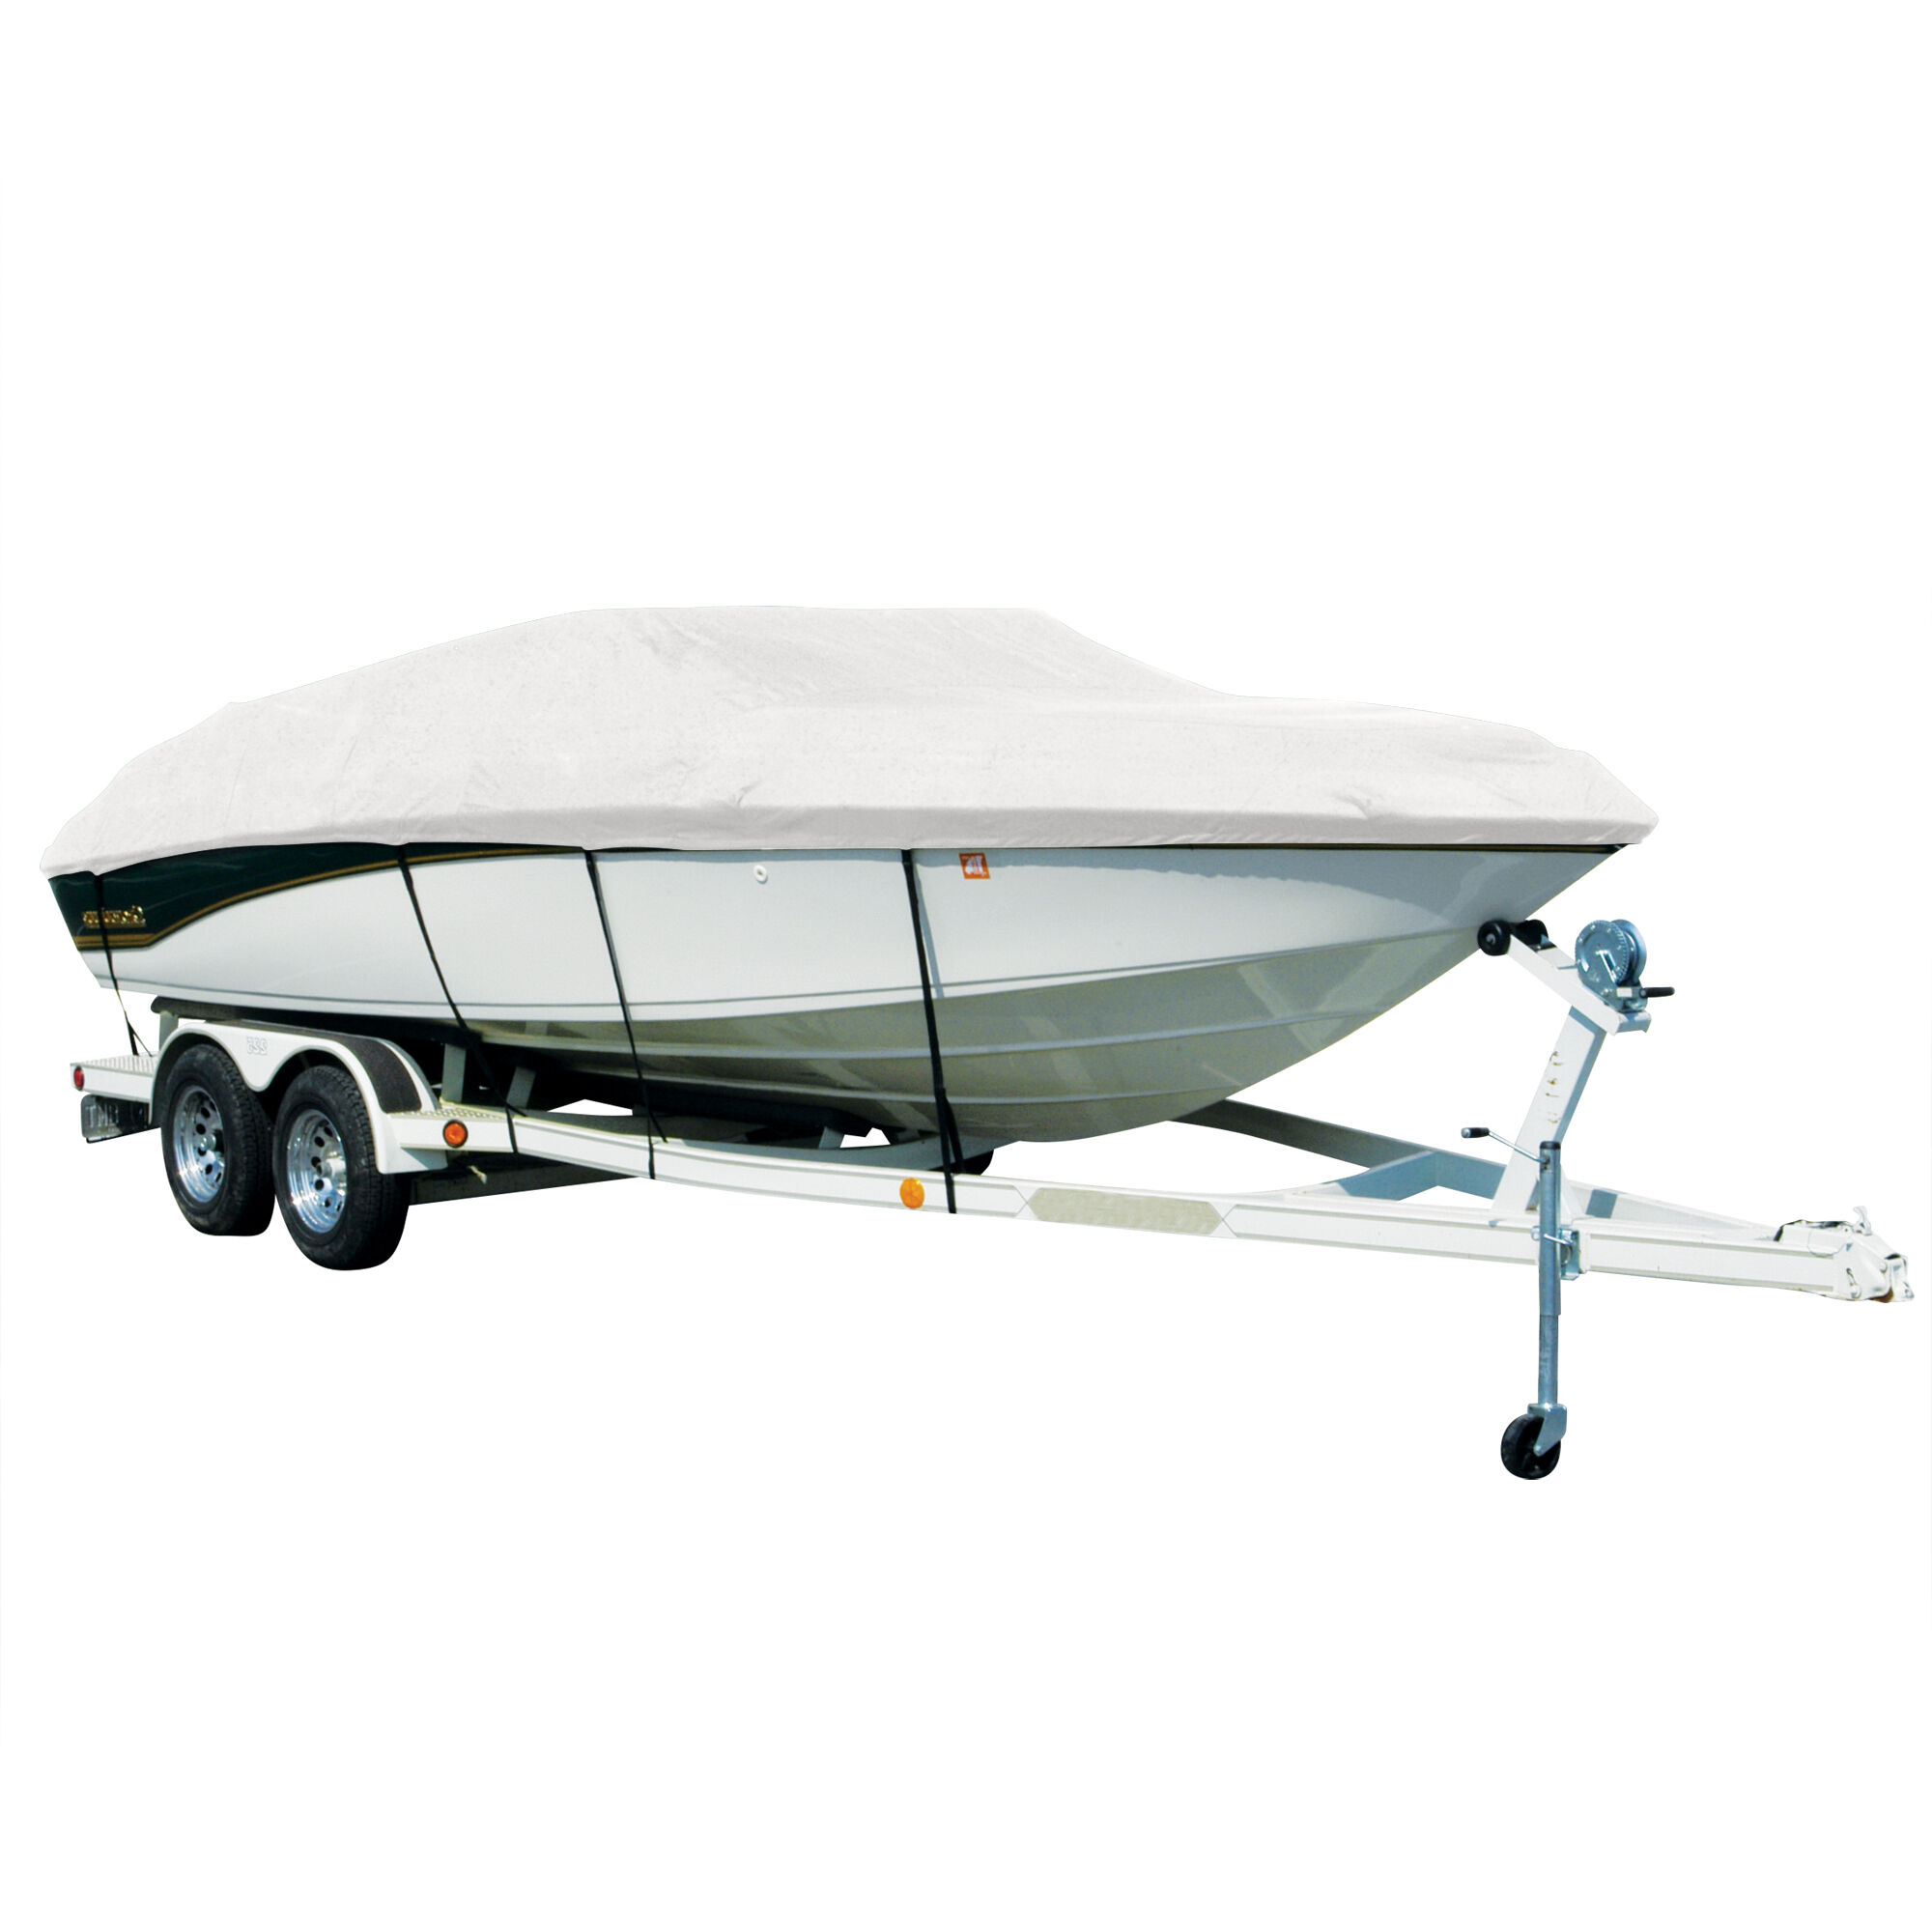 Covermate Exact Fit Sharkskin Boat Cover For SEA RAY 250 CC NO PULPIT in White